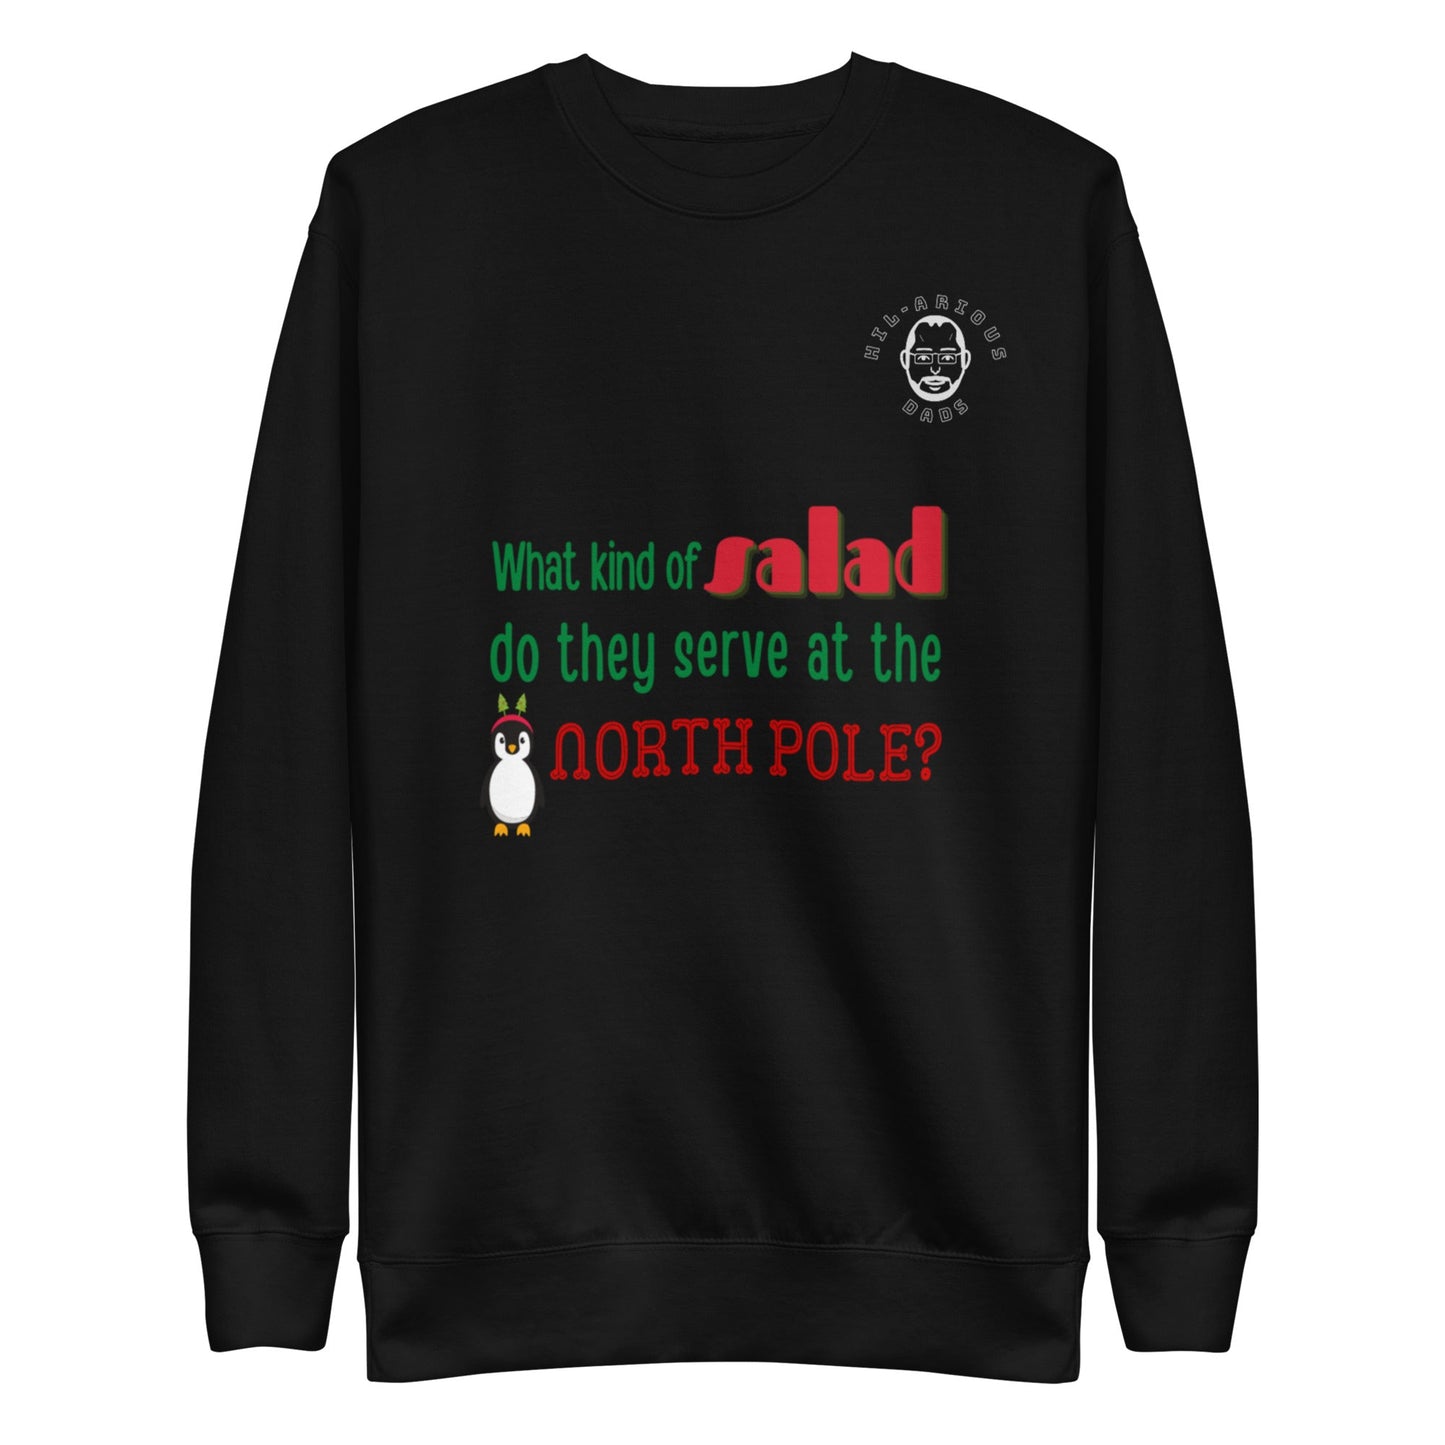 What kind of salad do they serve at the North Pole?-Sweatshirt - Hil-arious Dads